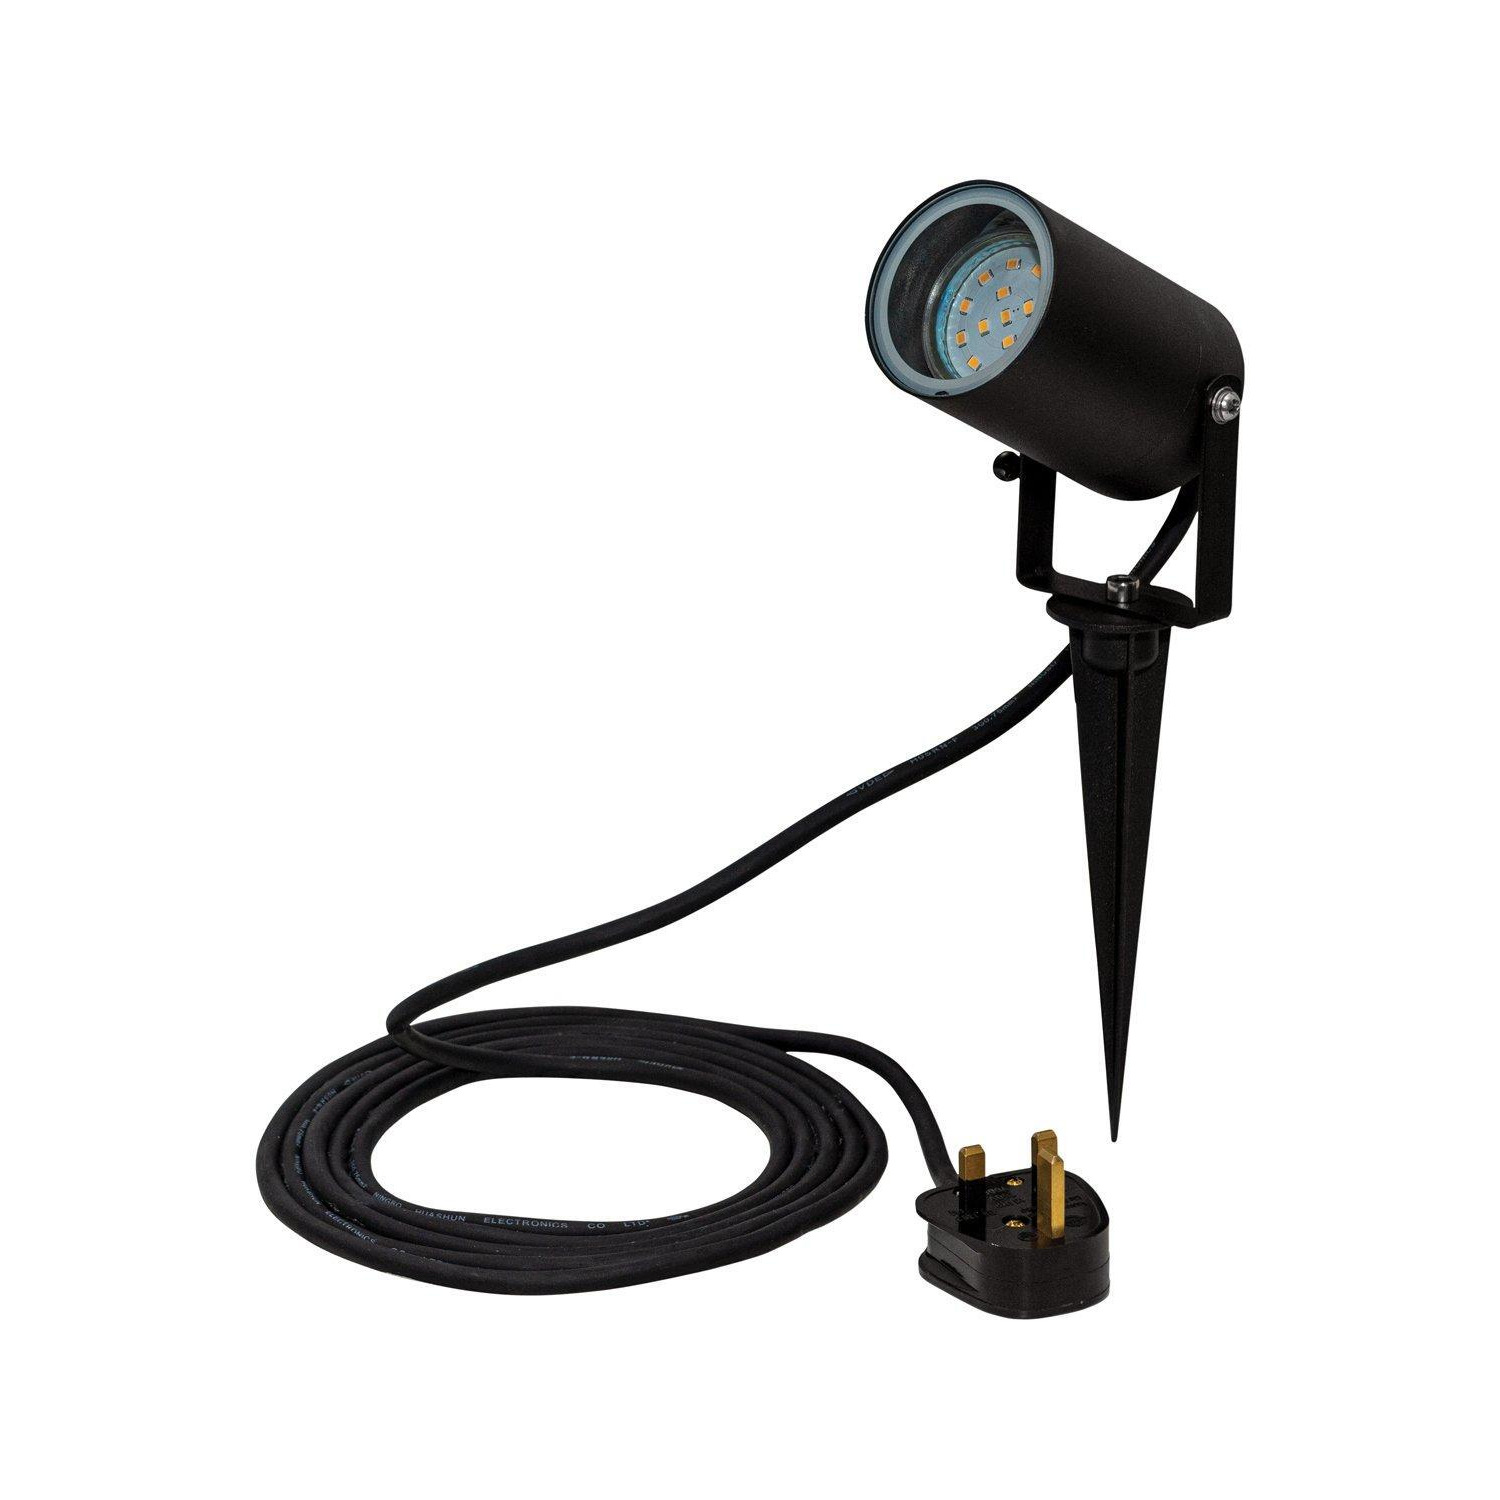 Lighting Onyx Water Resistant 230V 4W LED Outdoor Spotlight With Ground Spike and 3m Mains Cable - image 1